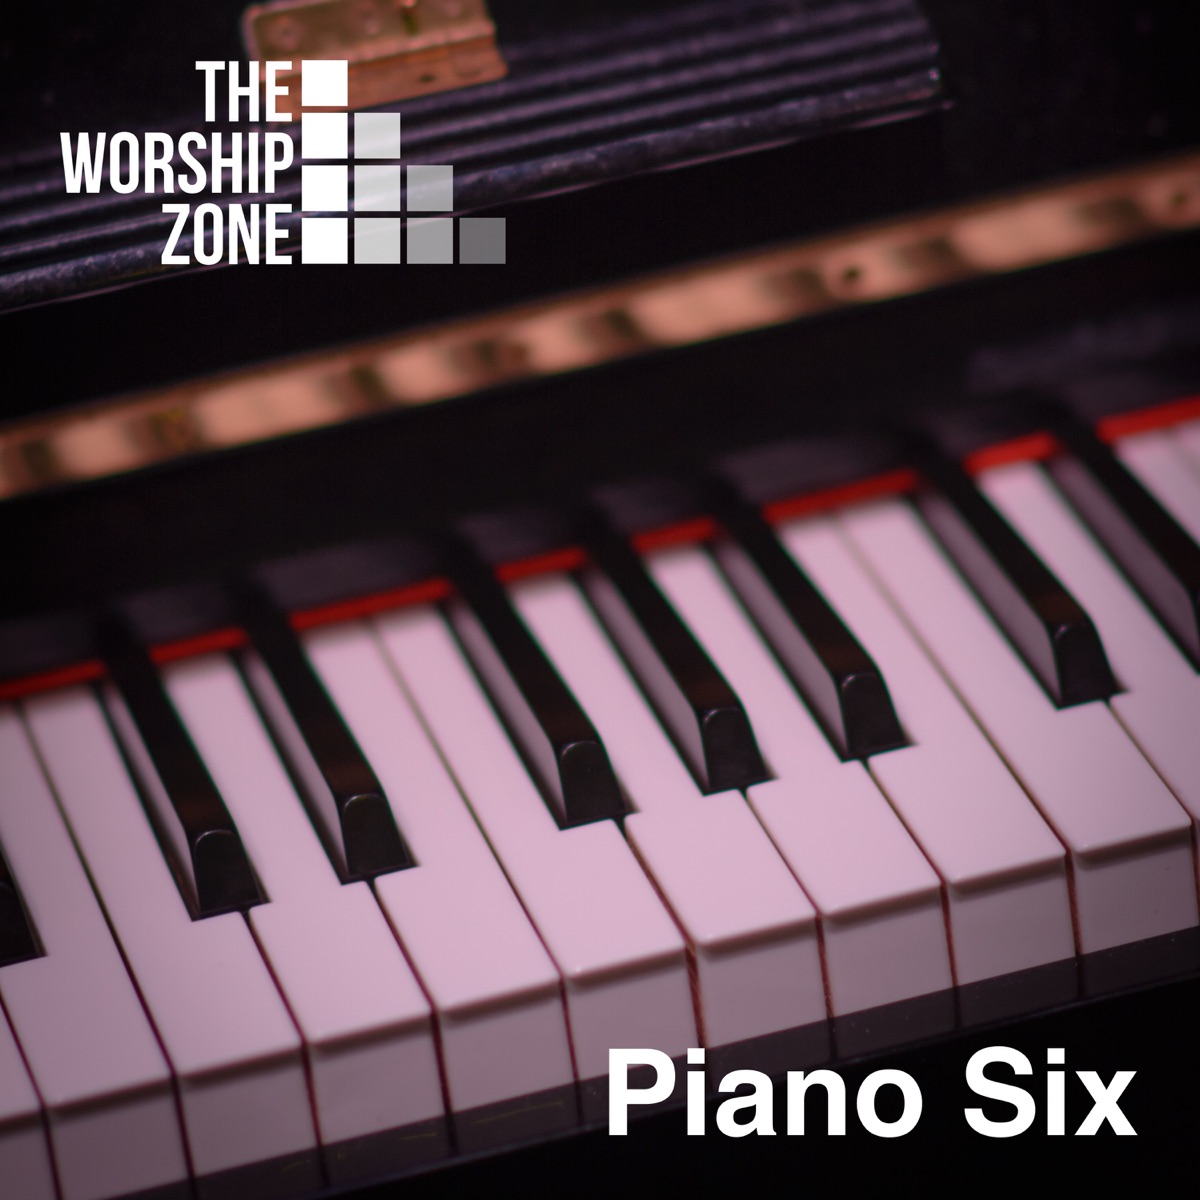 Piano Six - Album by The Worship Zone - Apple Music